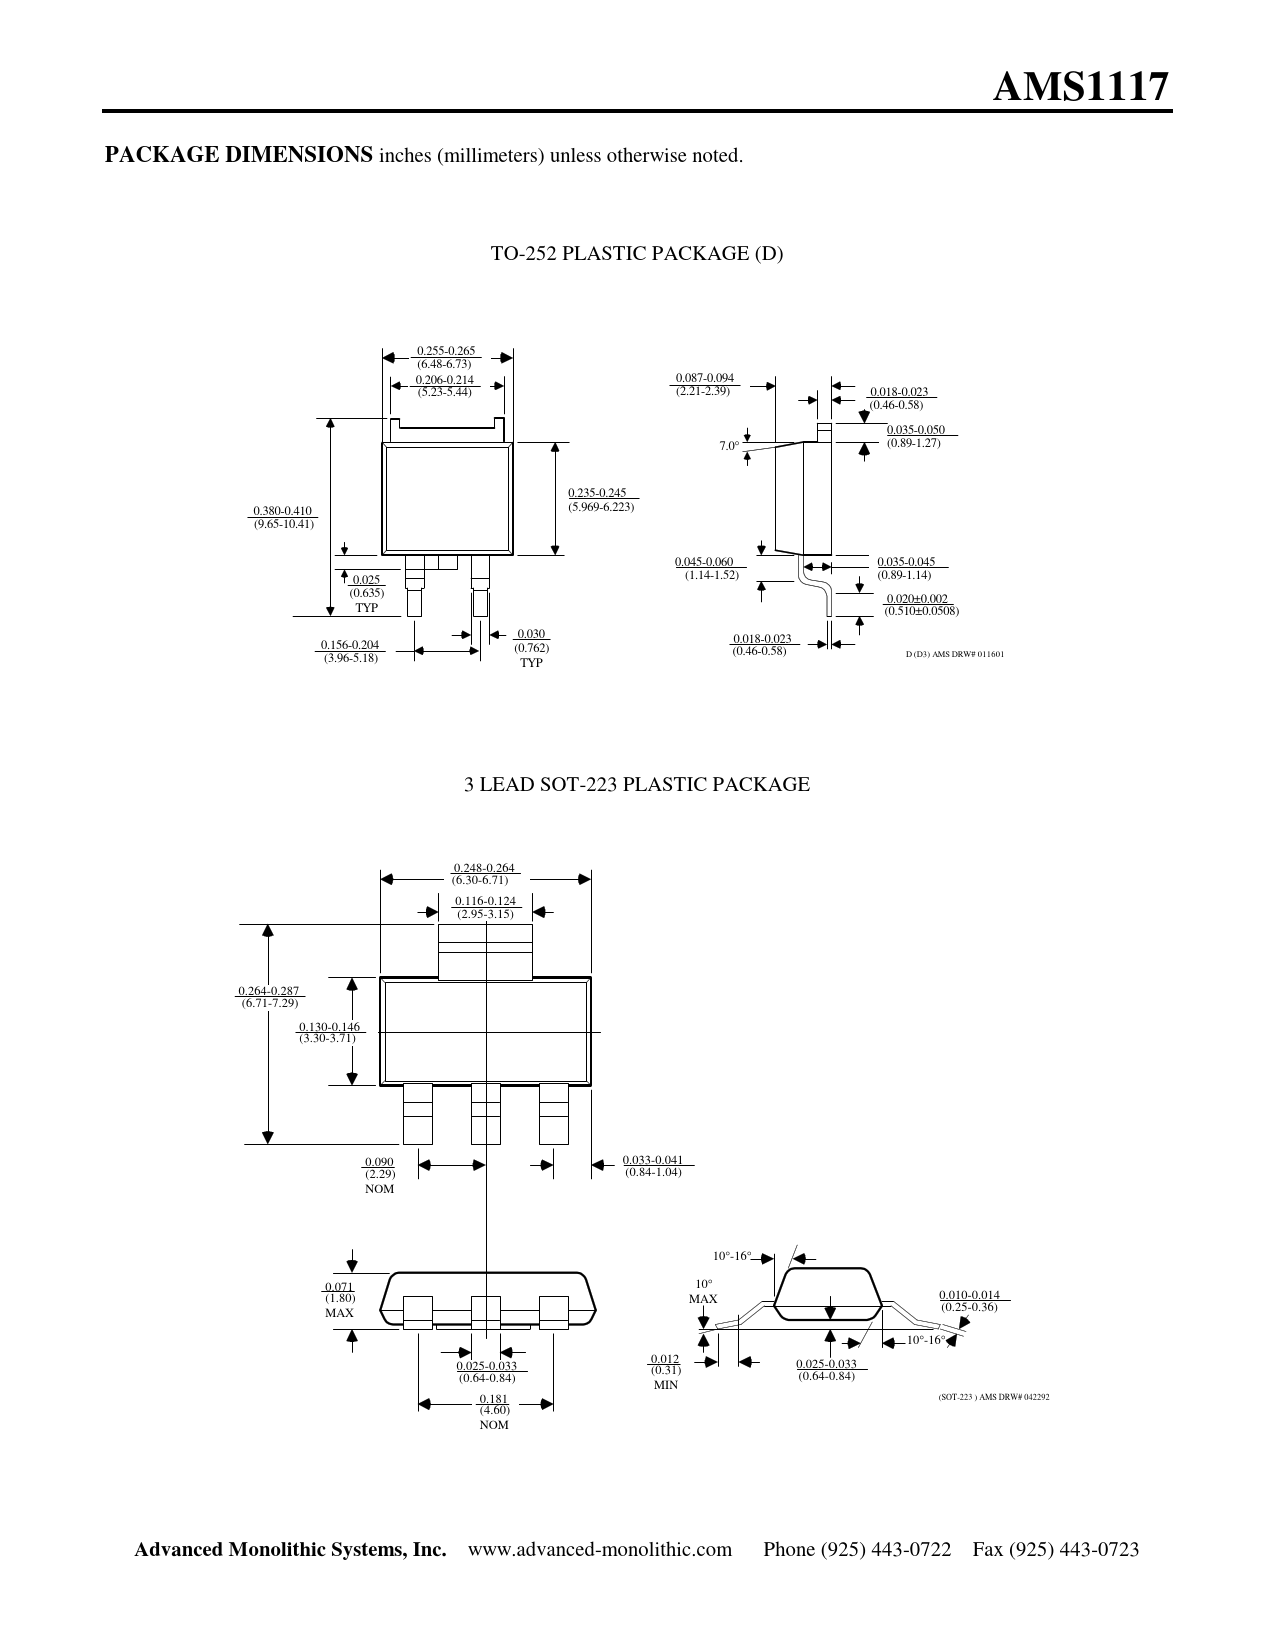 AMS1117. PACKAGE DIMENSIONS. Advanced Monolithic Systems, Inc - Datasheet  AMS1117 Advanced Monolithic Systems